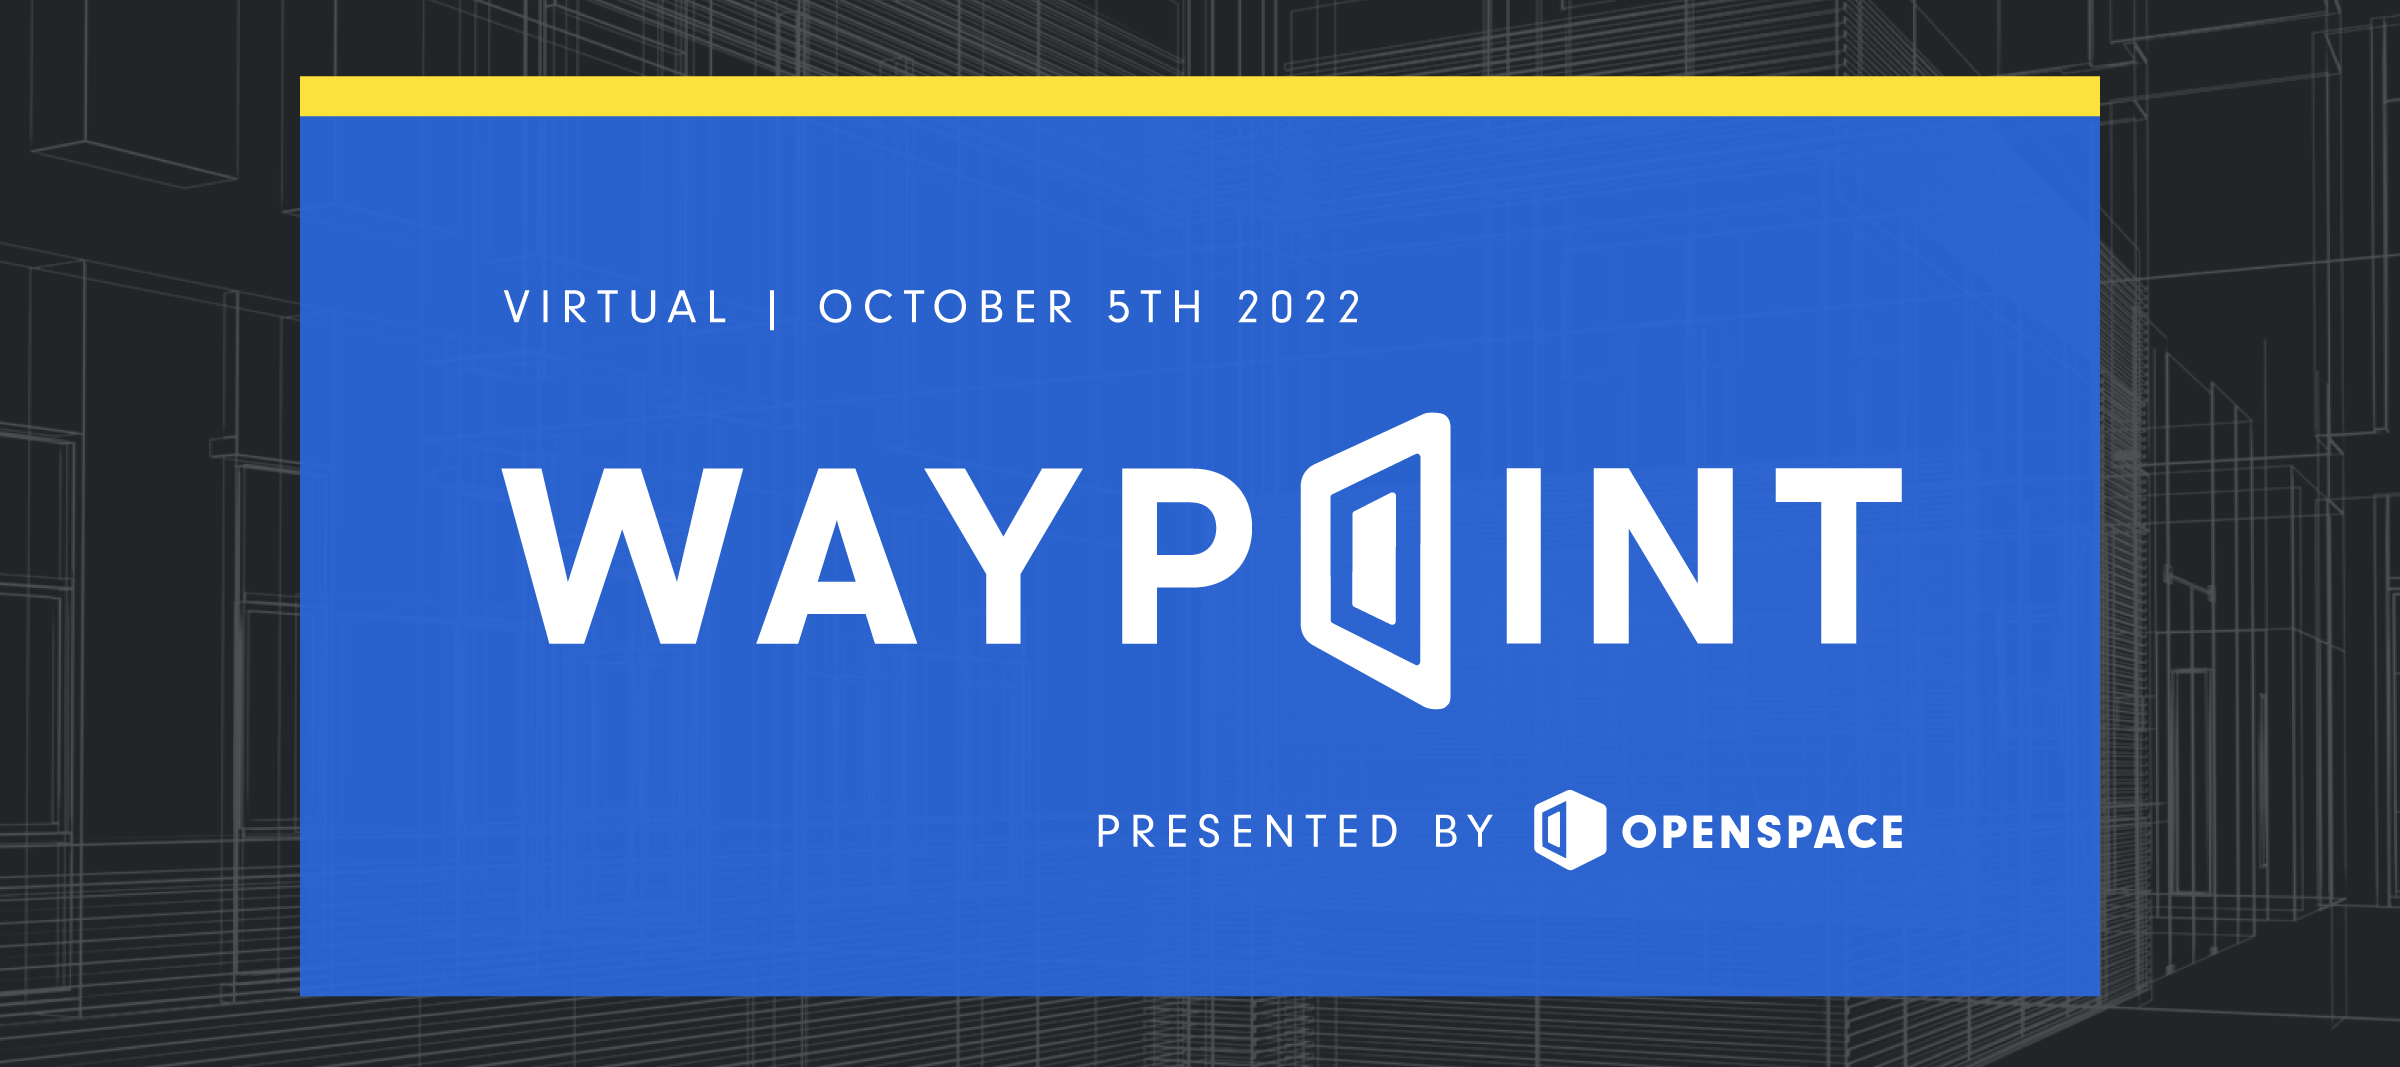 Spread the Word About Waypoint!